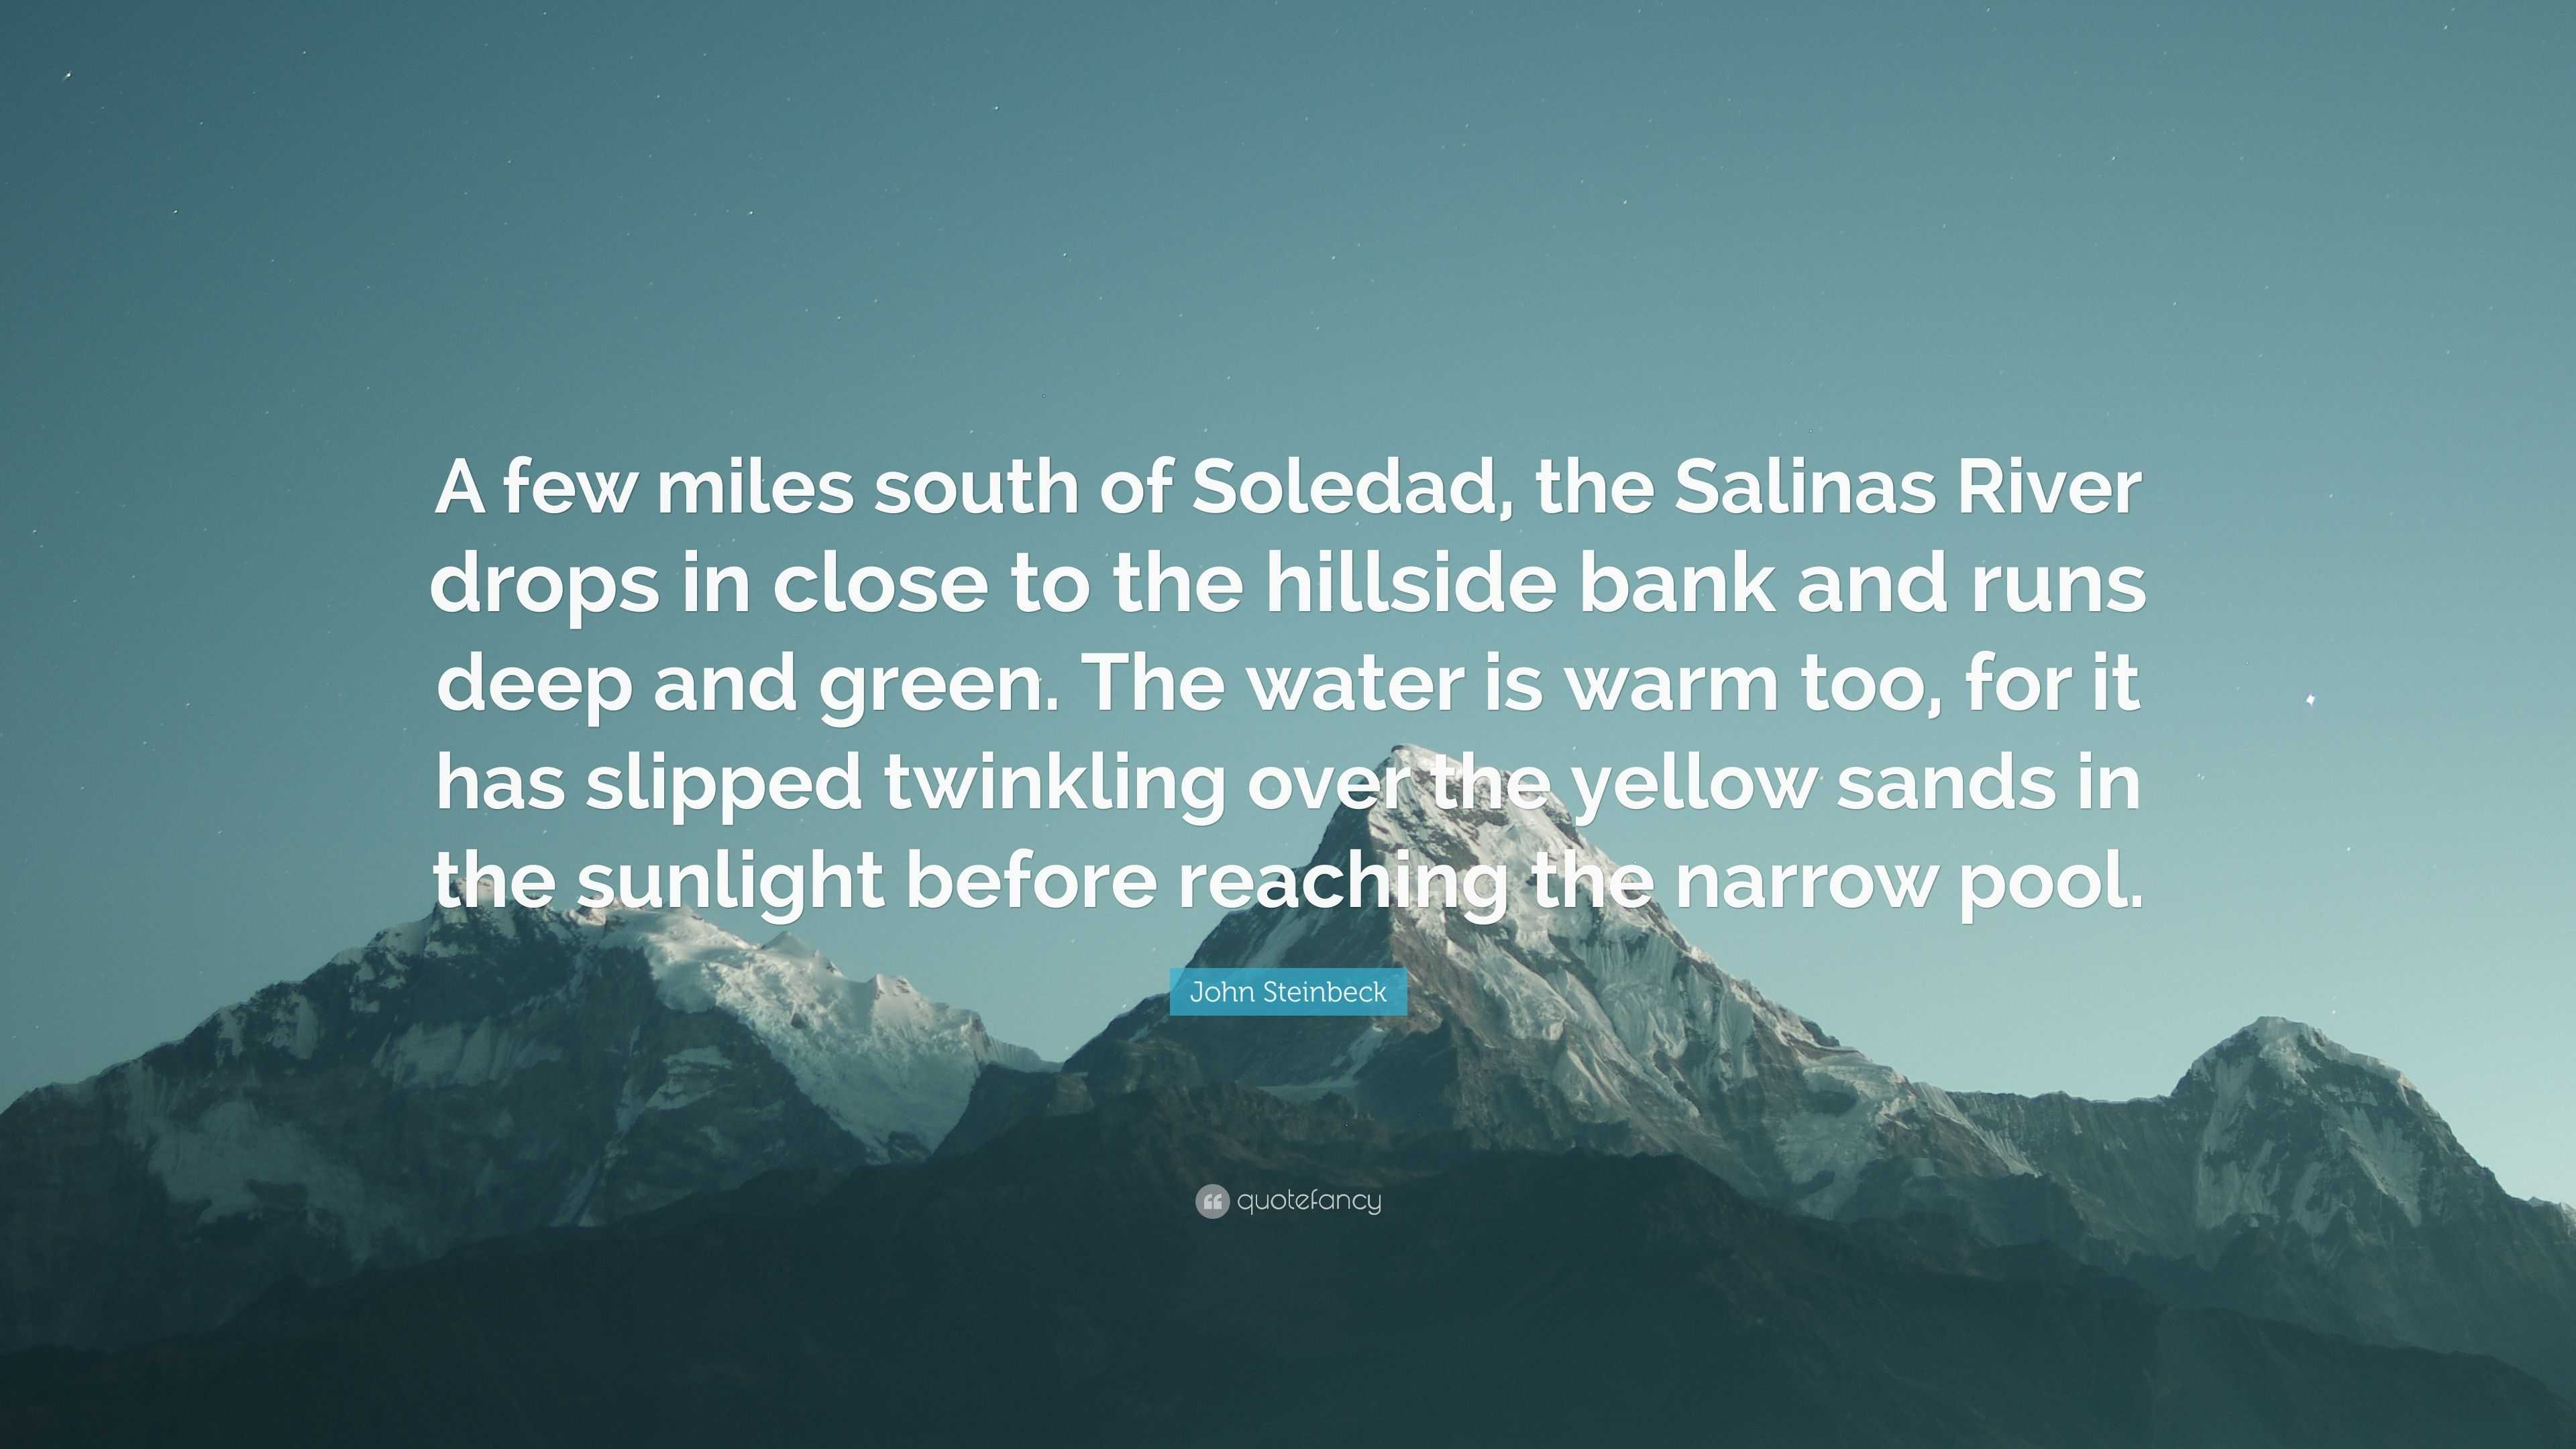 John Steinbeck Quote: “A few miles south of Soledad, the ...